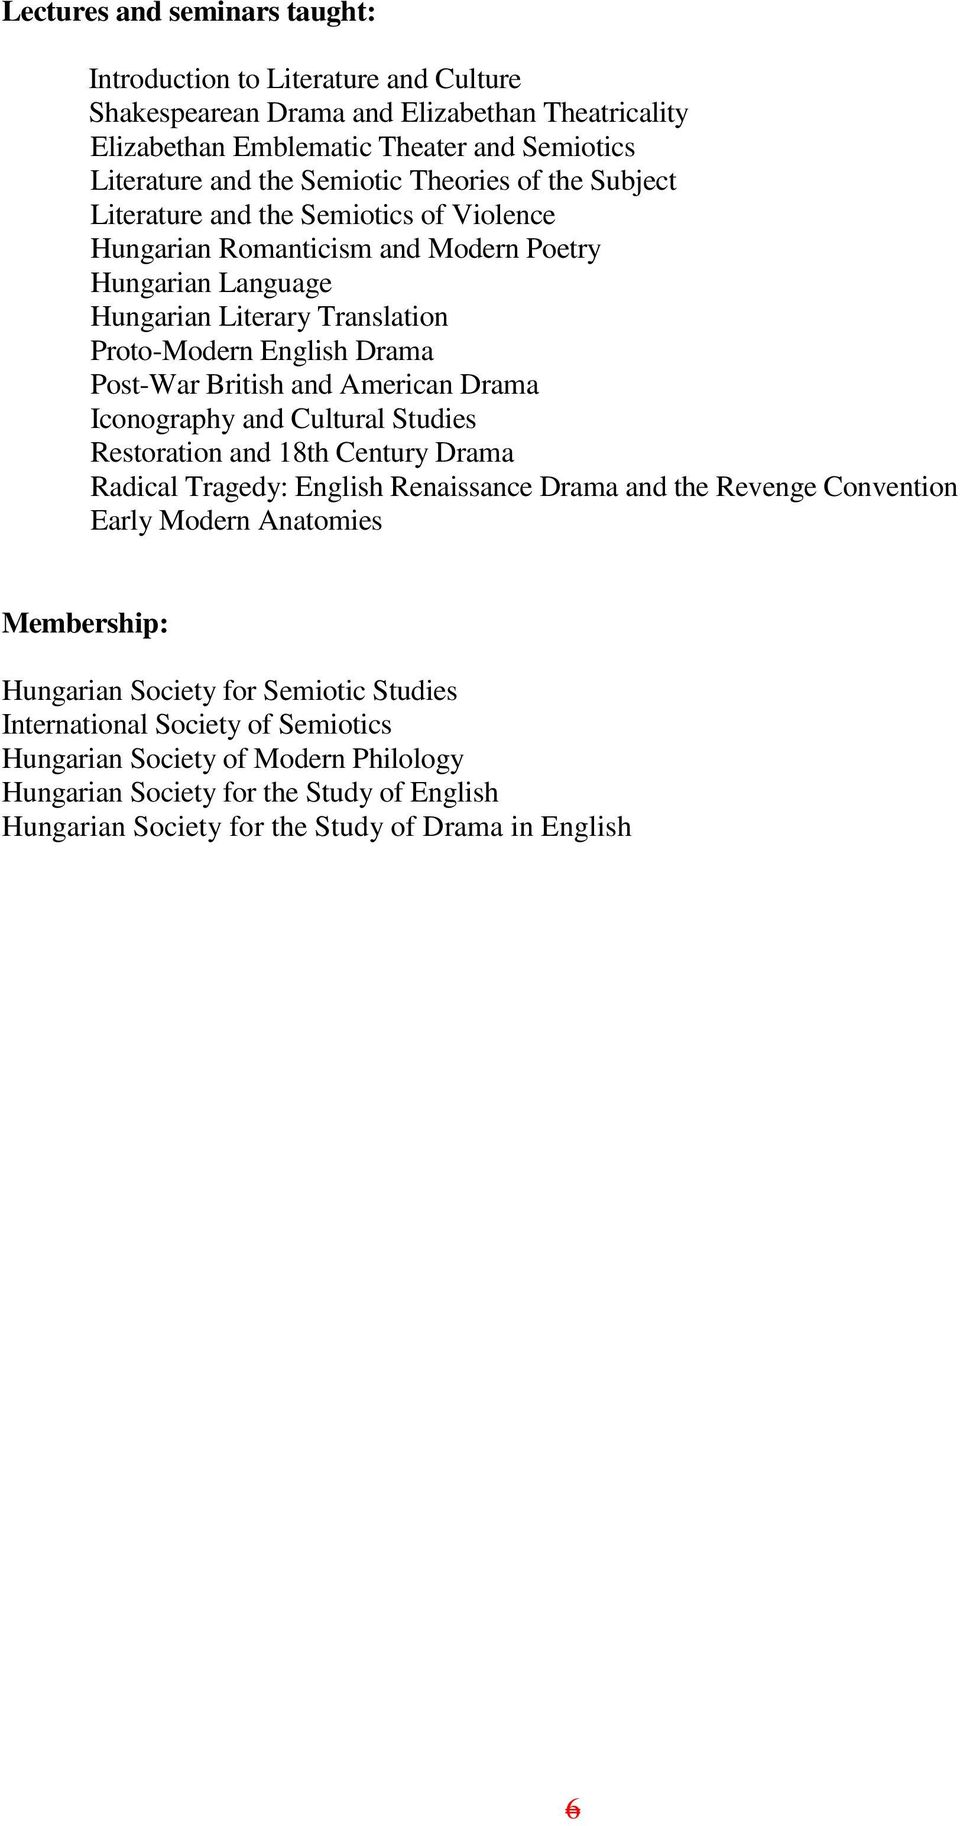 British and American Drama Iconography and Cultural Studies Restoration and 18th Century Drama Radical Tragedy: English Renaissance Drama and the Revenge Convention Early Modern Anatomies